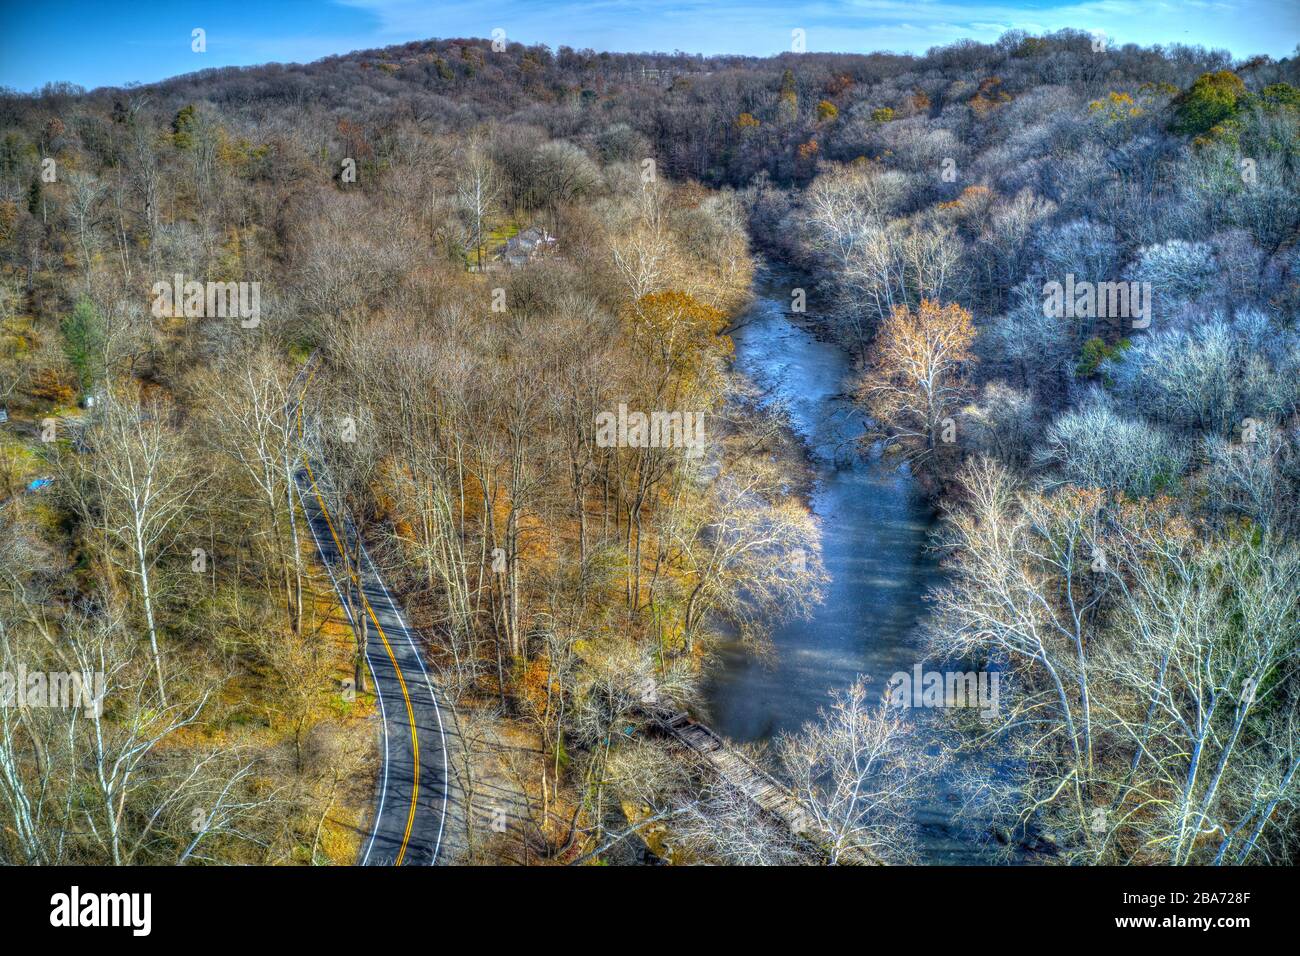 Aerial View of Woods in Fall Colors with a Road, Stream and House Stock Photo